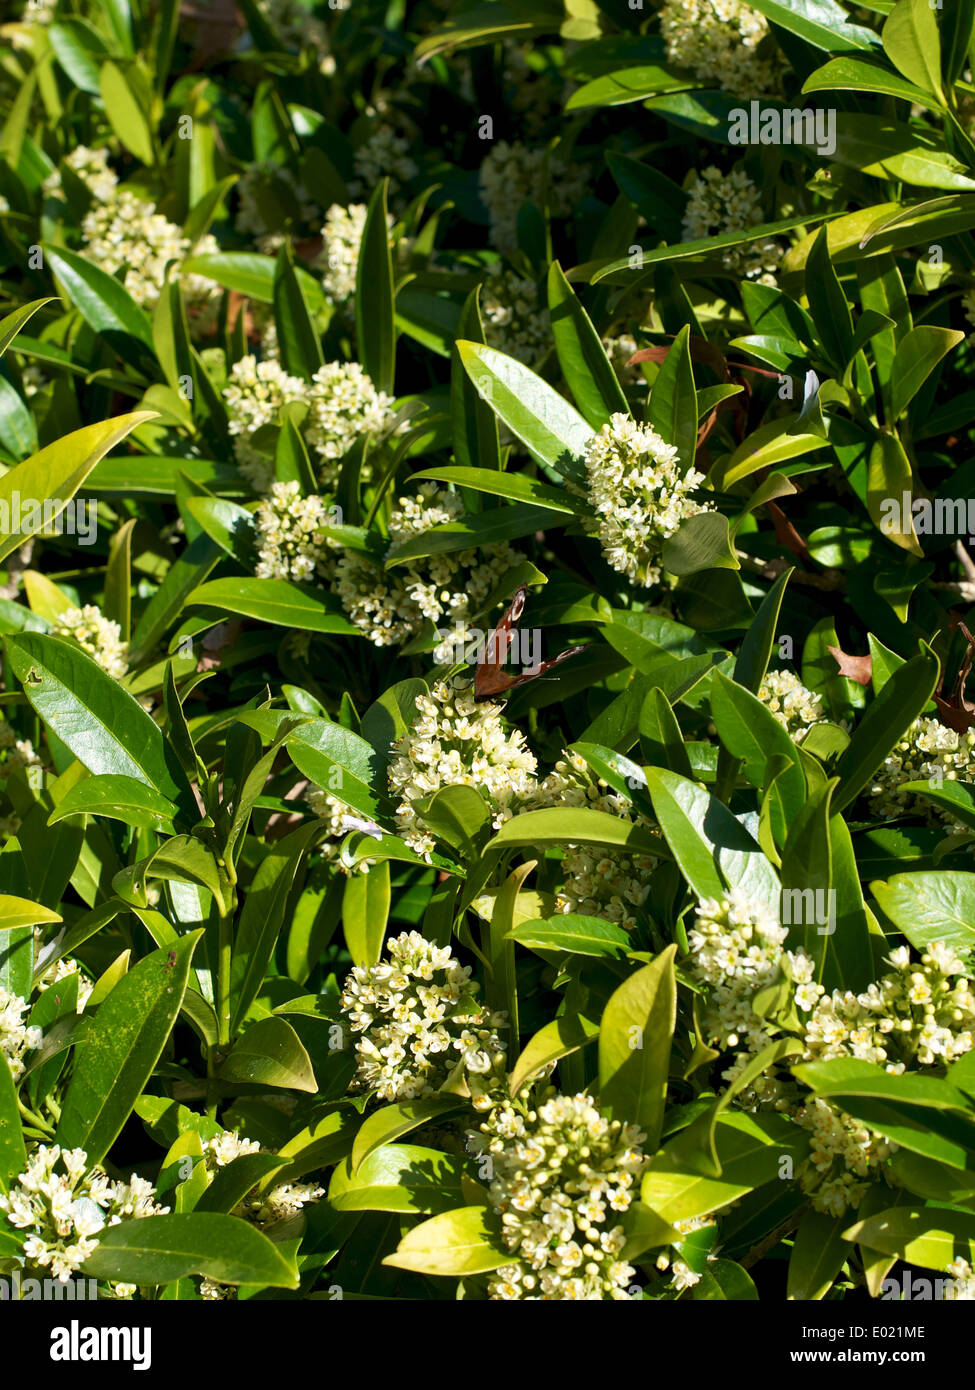 Skimmia x confusa 'Kew Green' shrub in flower and a Peacock butterfly 'Inachis io' Stock Photo